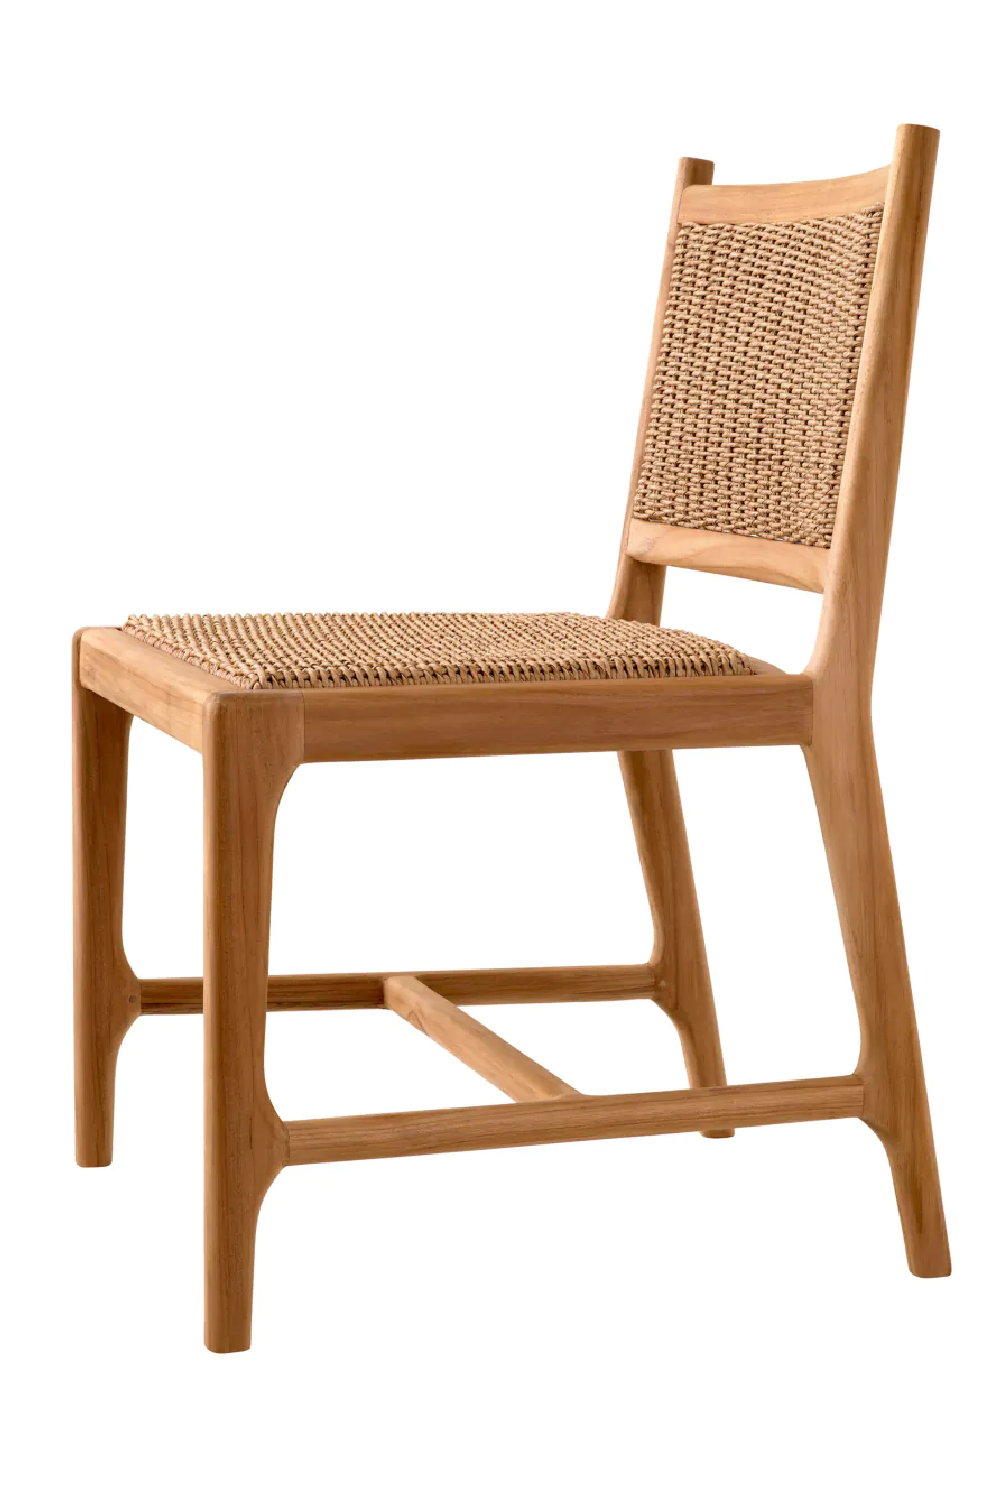 Natural Weave Outdoor Dining Chair | Eichholtz Pivetti | Oroa.com